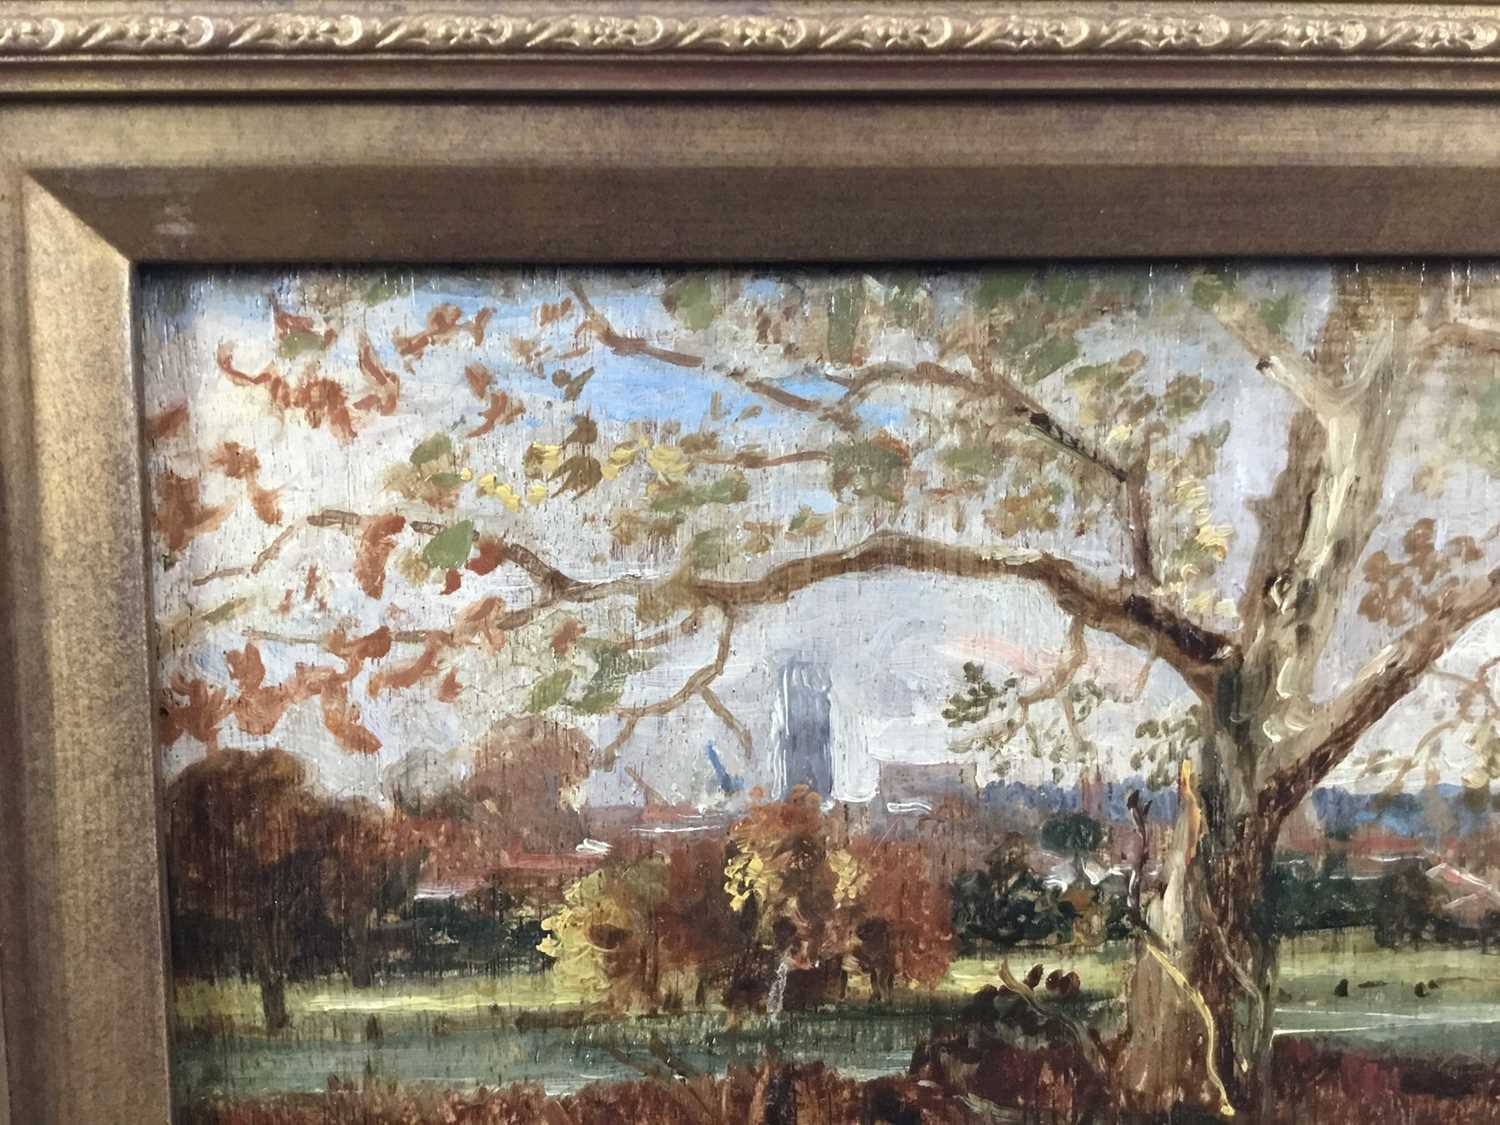 Thomas Churchyard (1798-1865) oil on panel - View through trees, inscribed 'Anna' verso, 13.5cm x 28 - Image 2 of 8